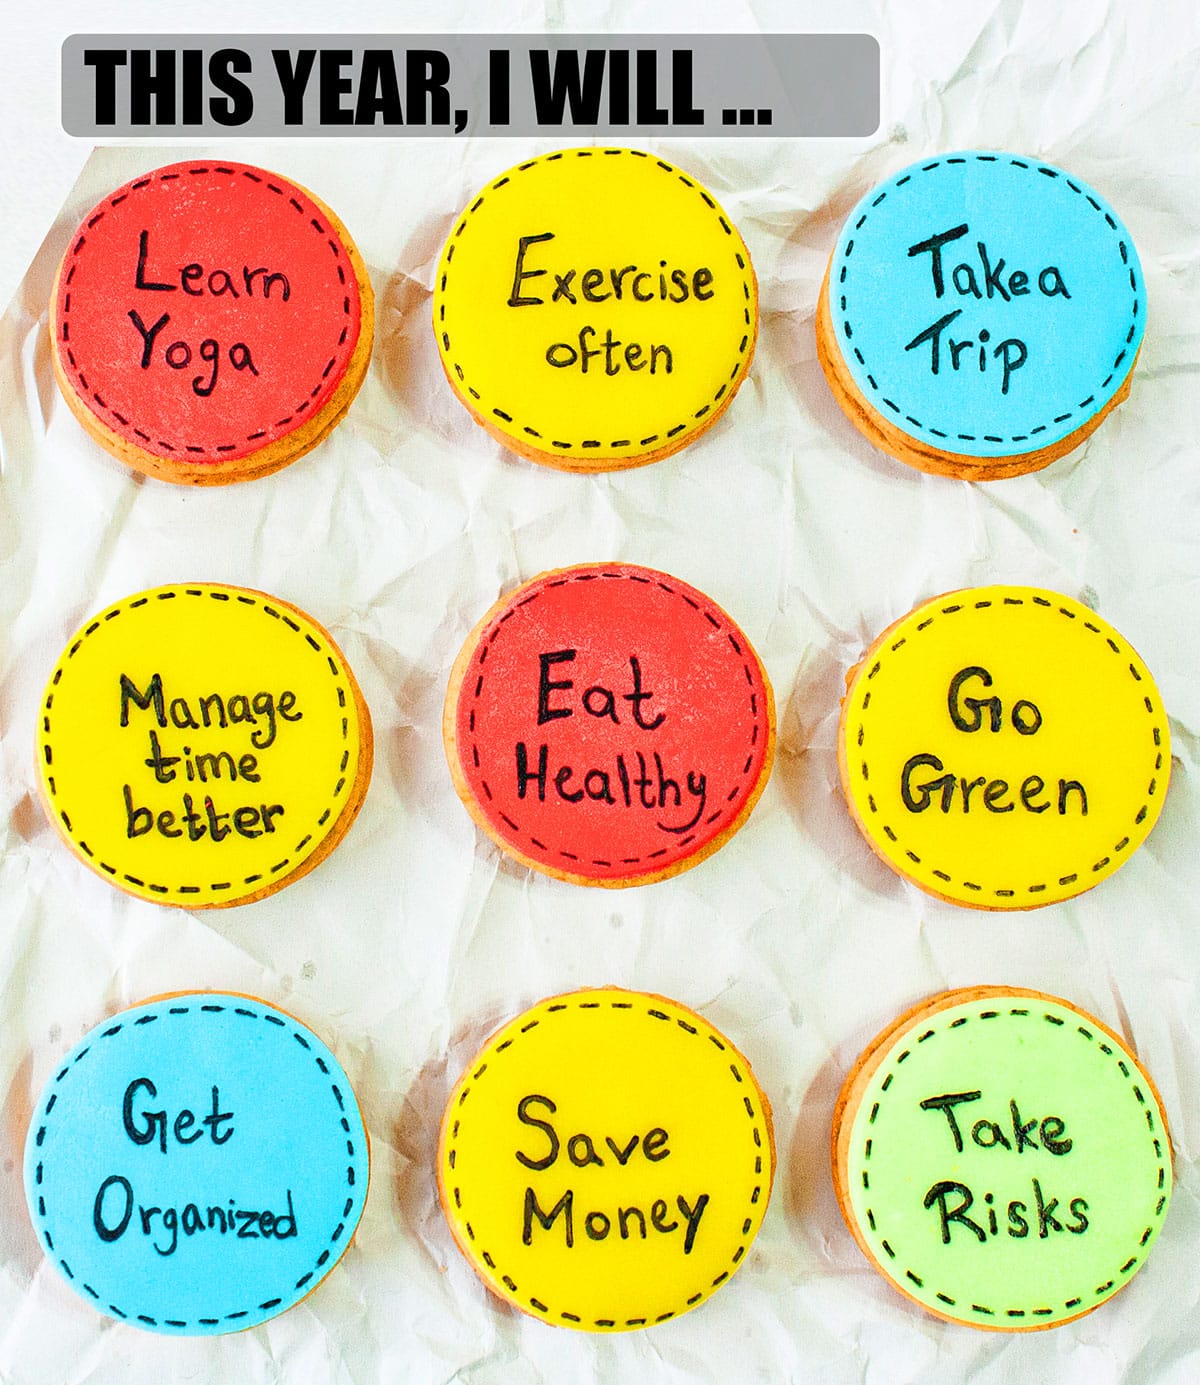 Easy Homemade Decorated Oreos For New Year's Eve Party With Resolutions on Crumpled Paper. 